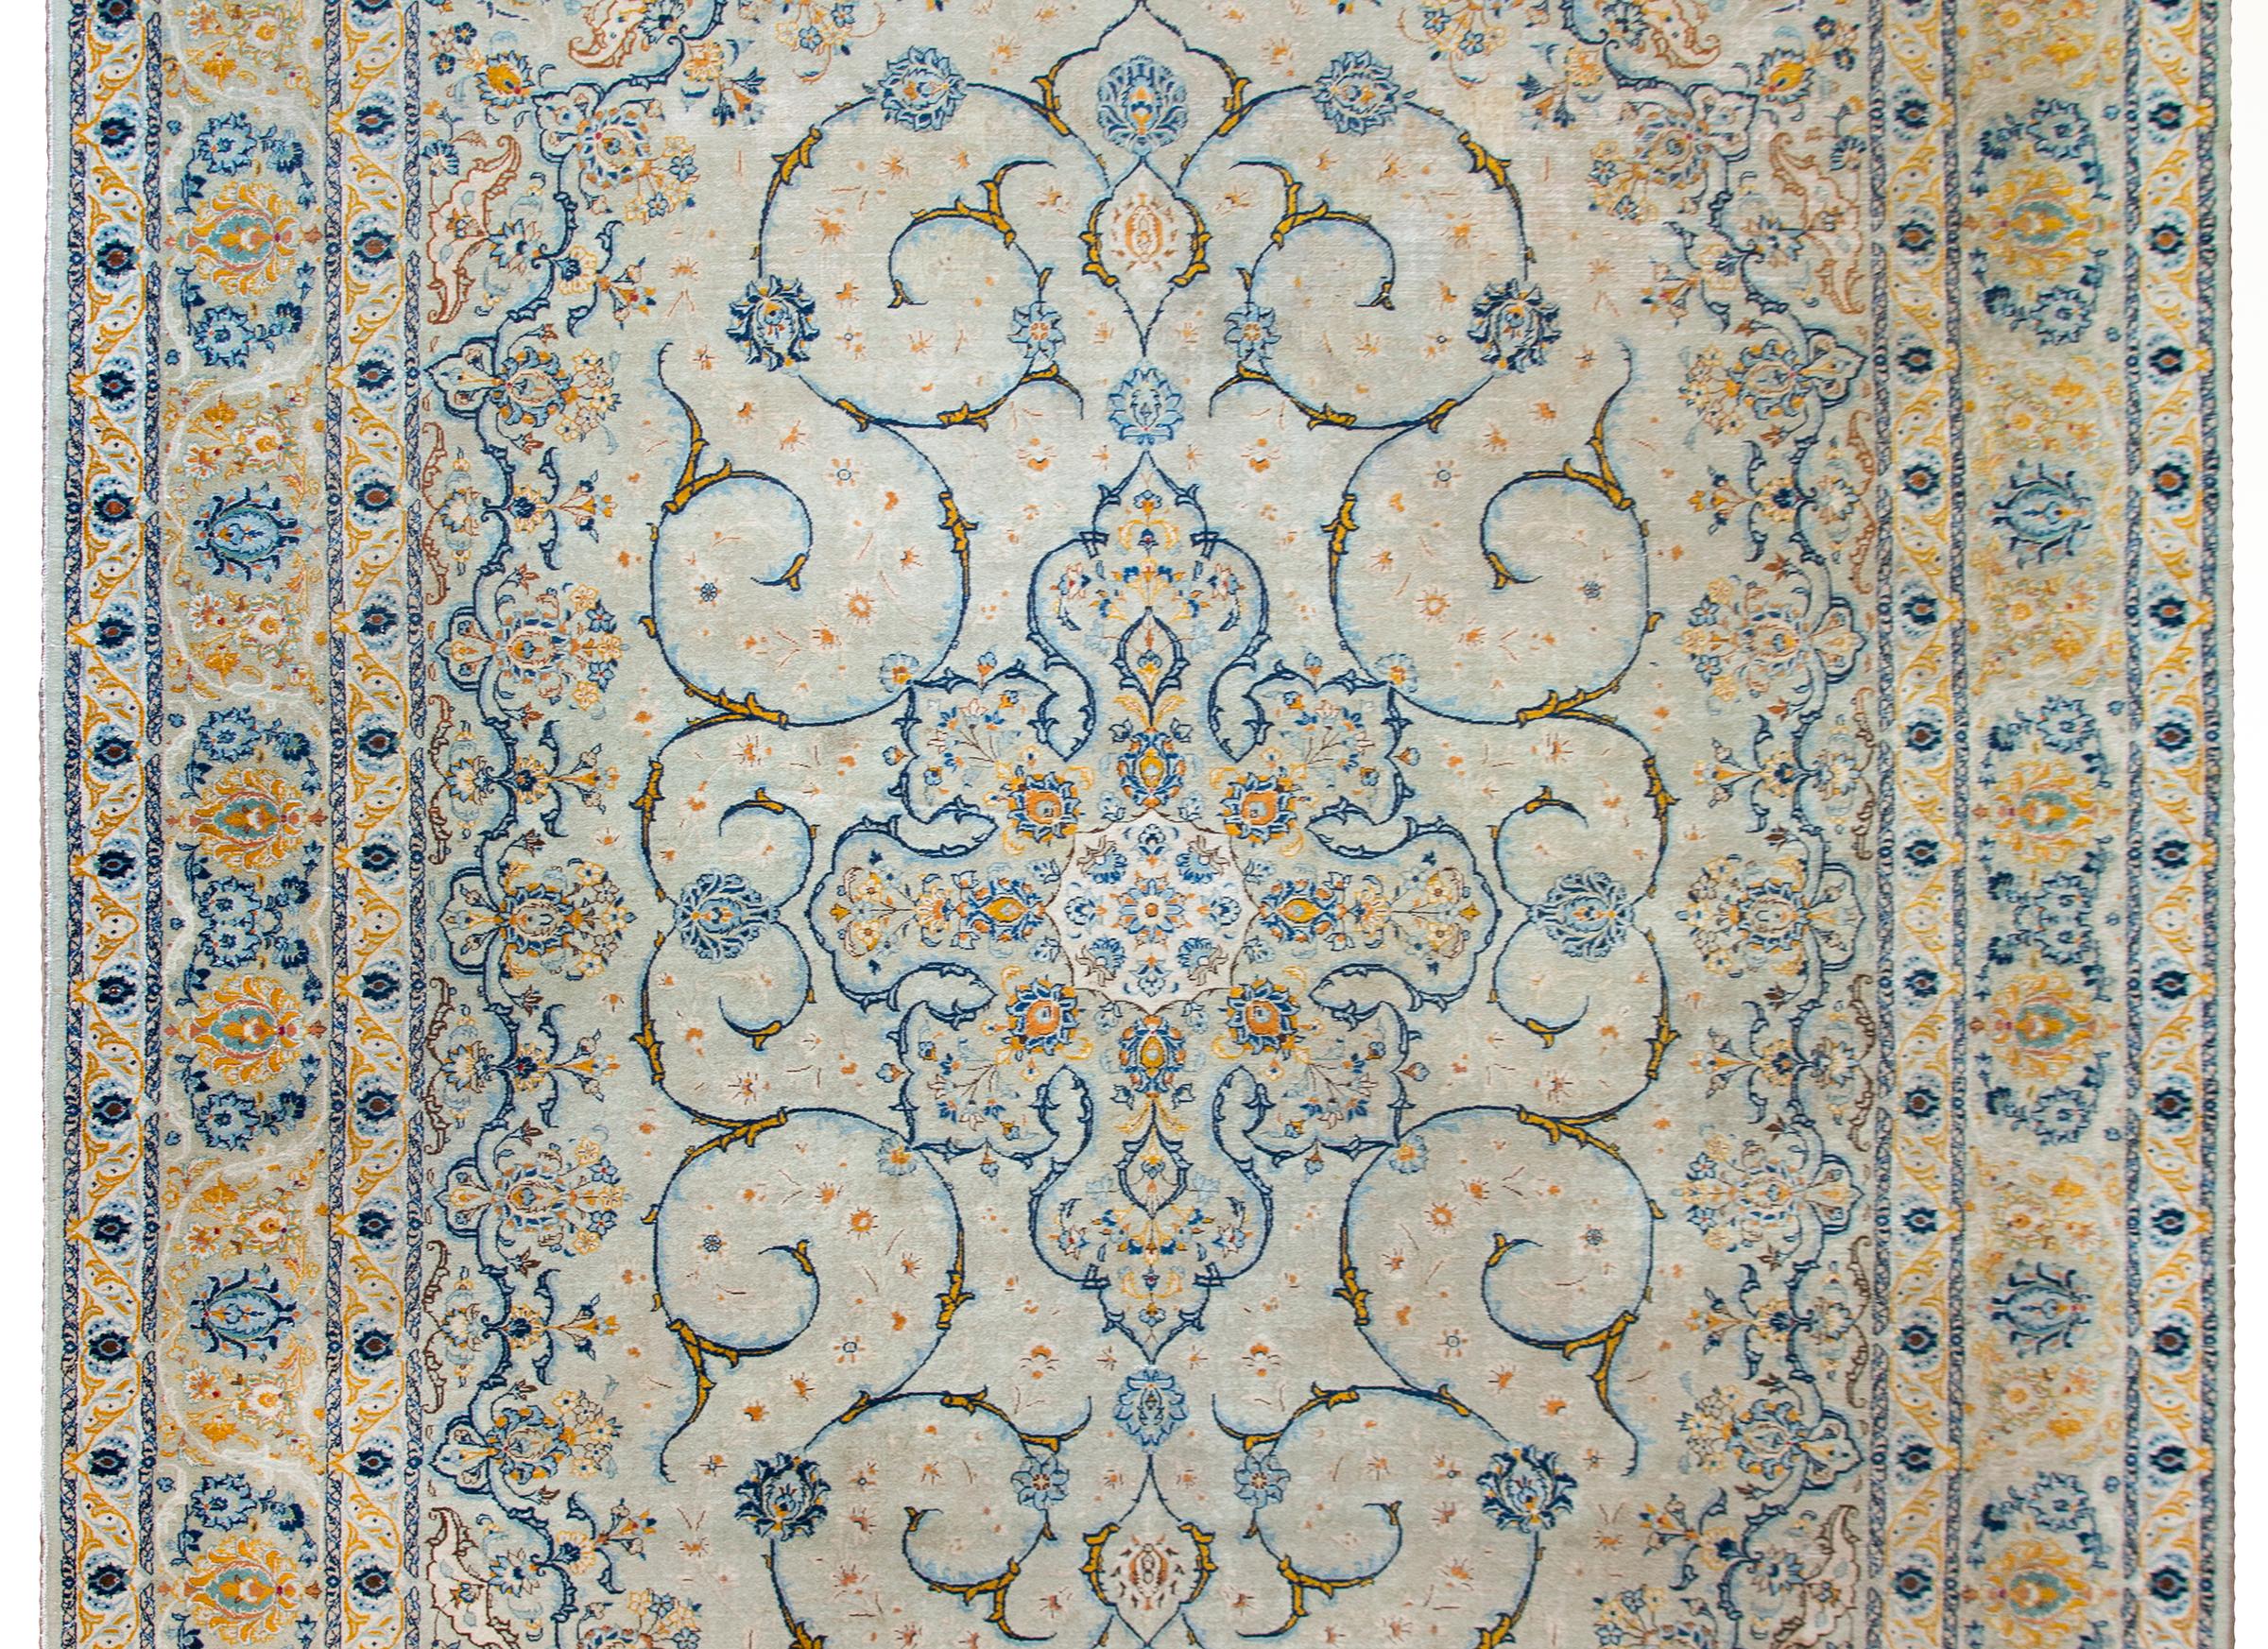 A stunning early 20th century Persian Kashan rug with a mesmerizing medallion with stylized flowers and scrolling vines surrounded by an incredible floral patterned border, all woven in brilliant indigos, golds, whites, and reds.